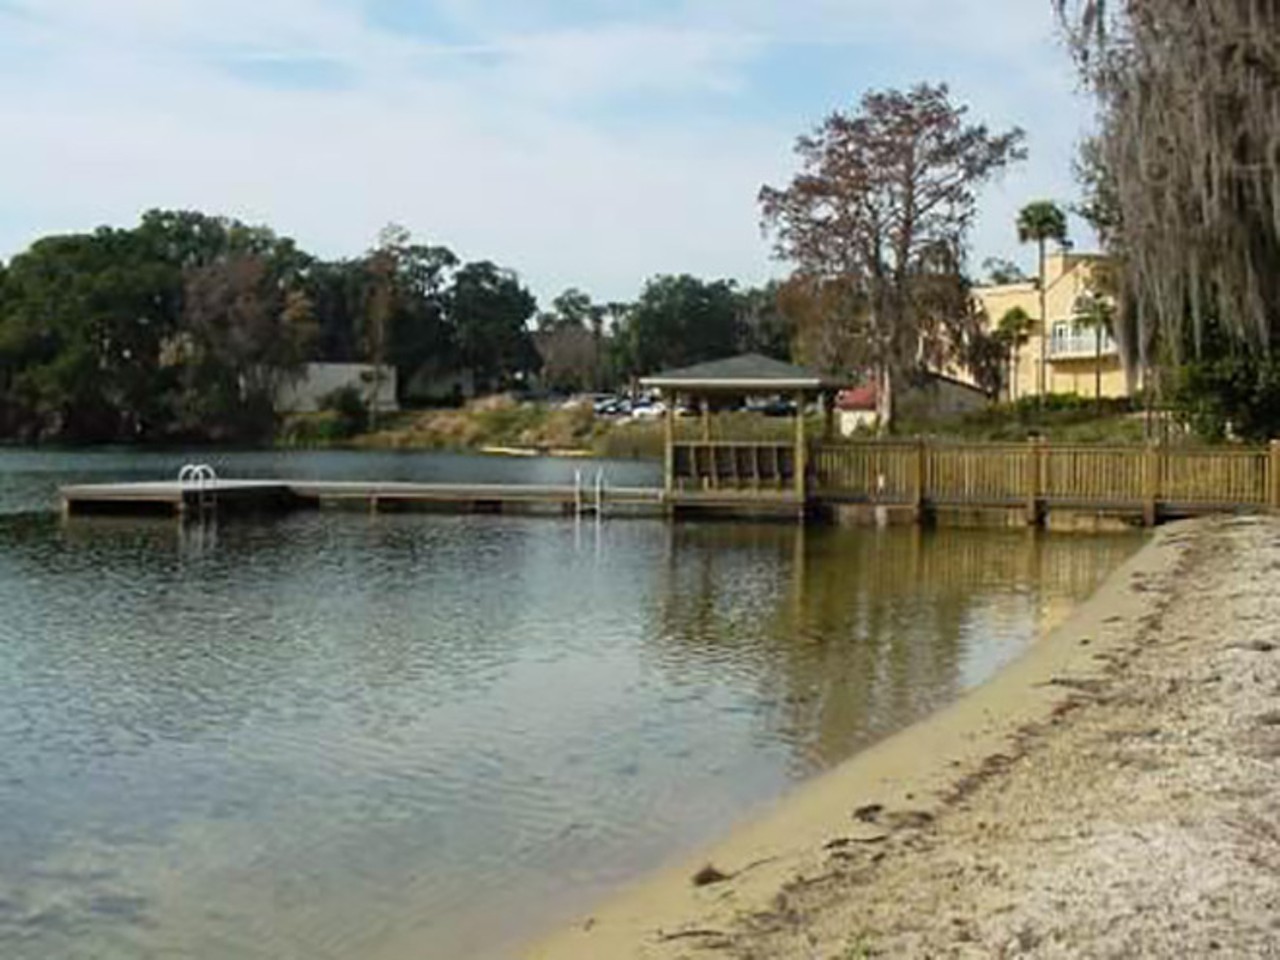 Spend the day lounging at Dinky Dock
Dinky Dock in Winter Park offers a boat ramp and fishing pier for the community. When things get too hot, as they normally do in Florida, feel free to take a dip in the lake. Light hearted fun.
Price: free
Photo via cityofwinterpark.org